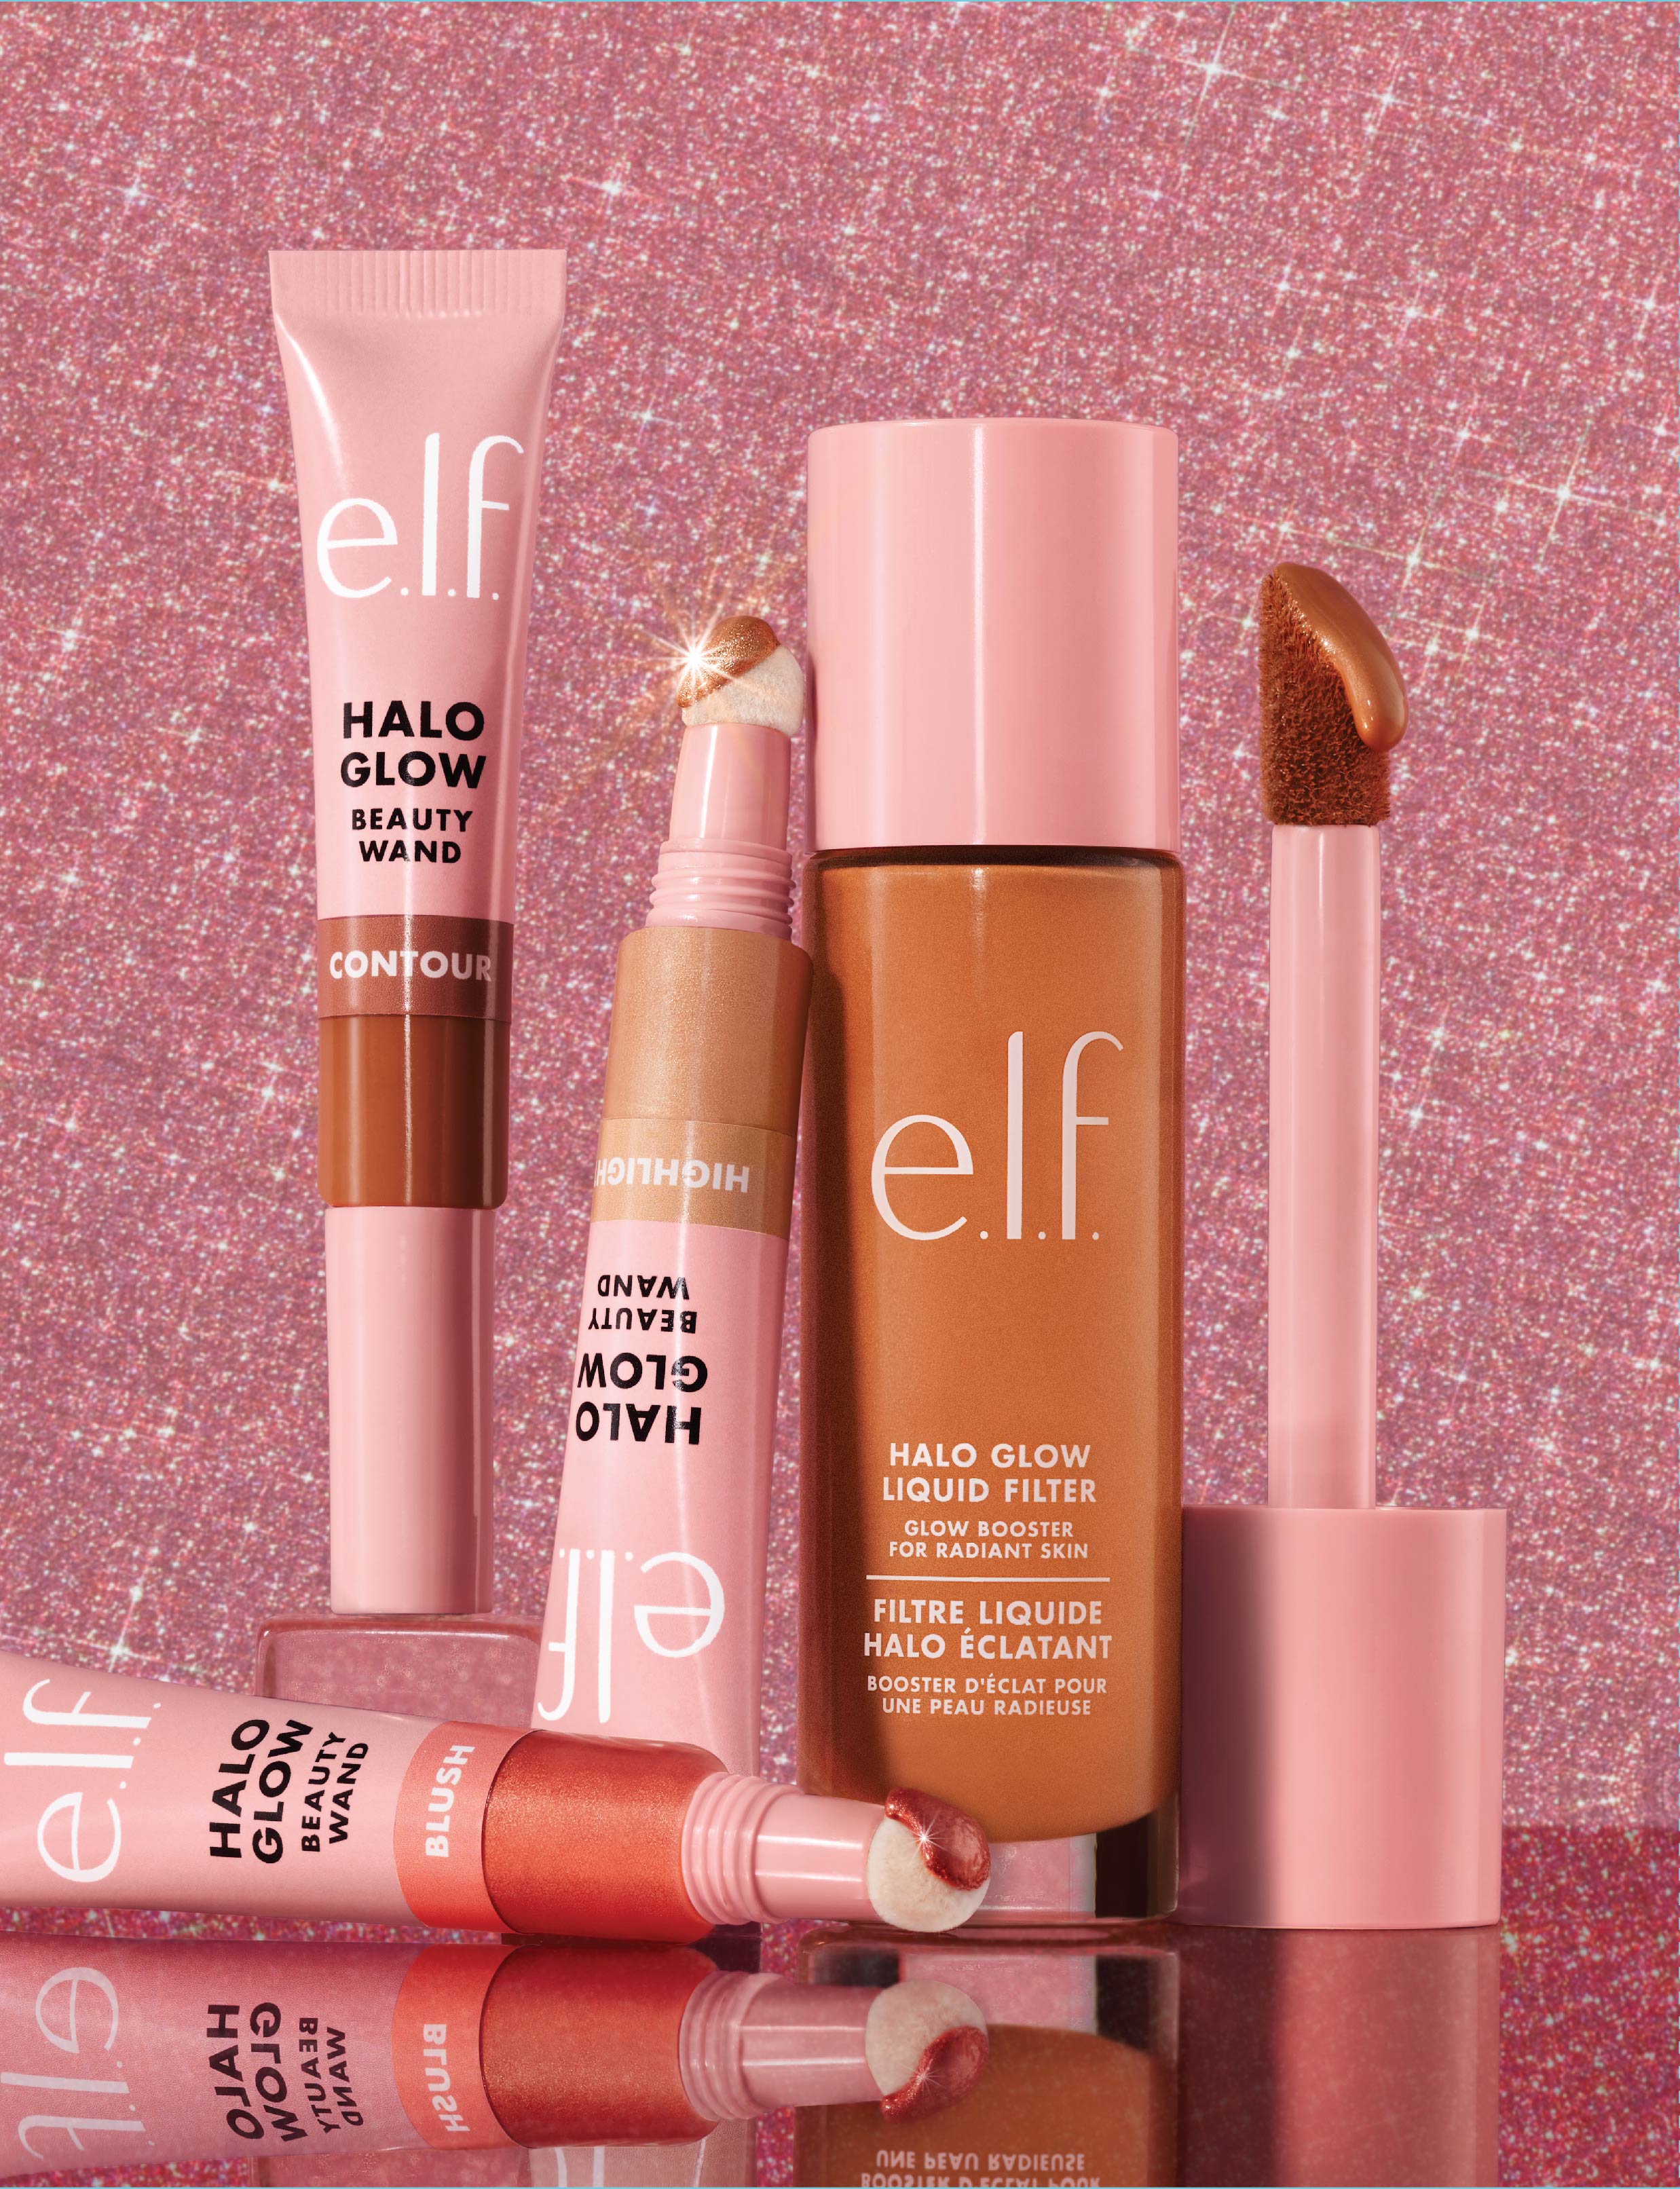 elf Halo Glow Liquid Filters + Blushes Expansion Swatches